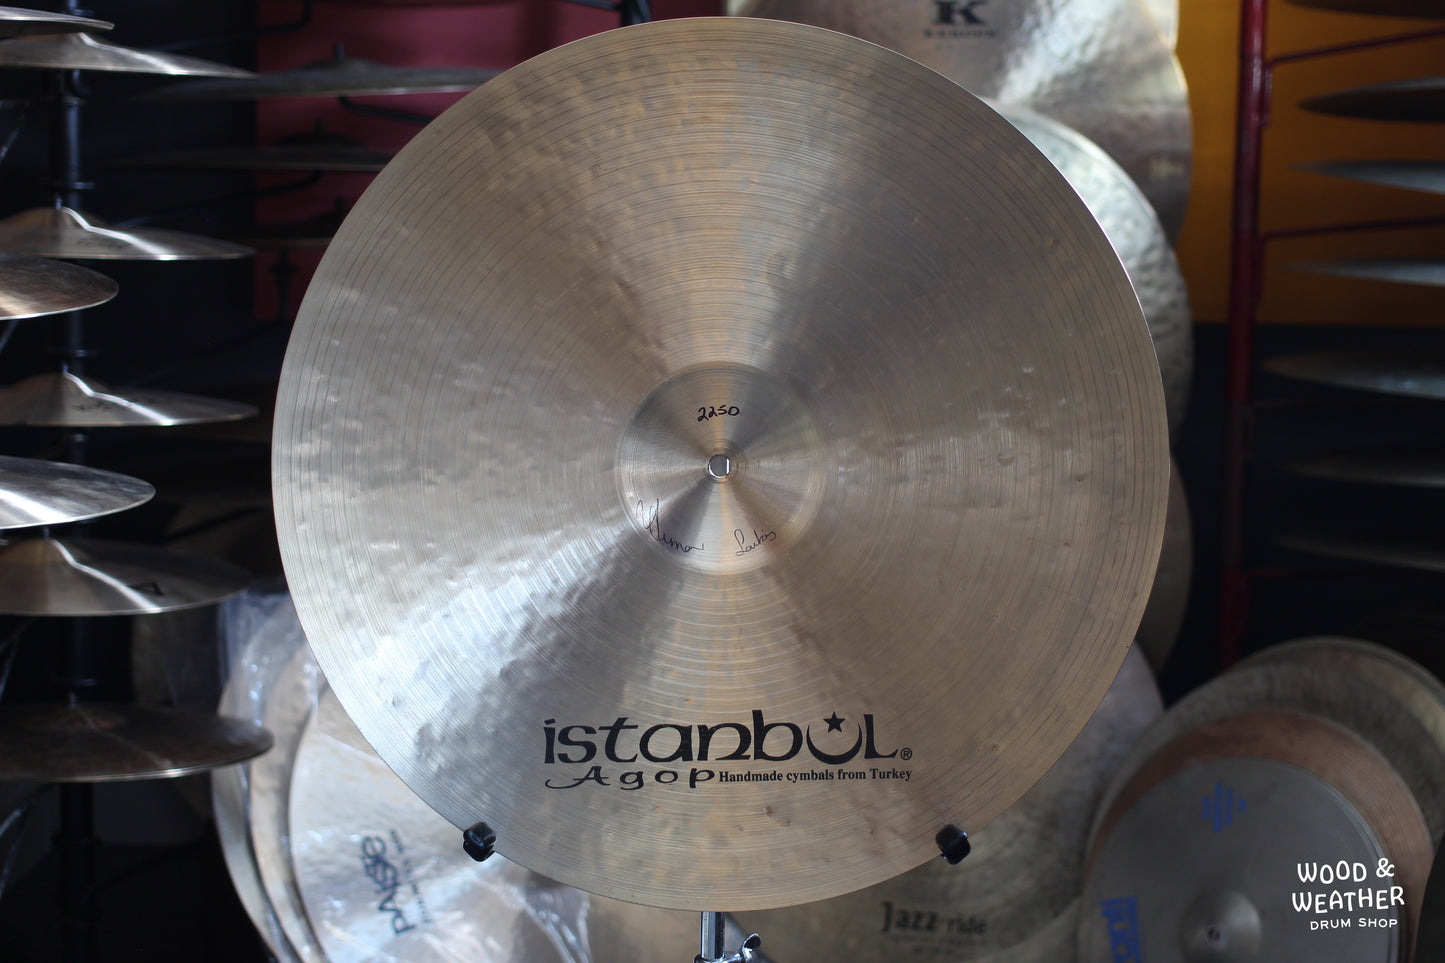 Used Istanbul Agop 22" Signature Mel Lewis Ride Cymbal 2250g